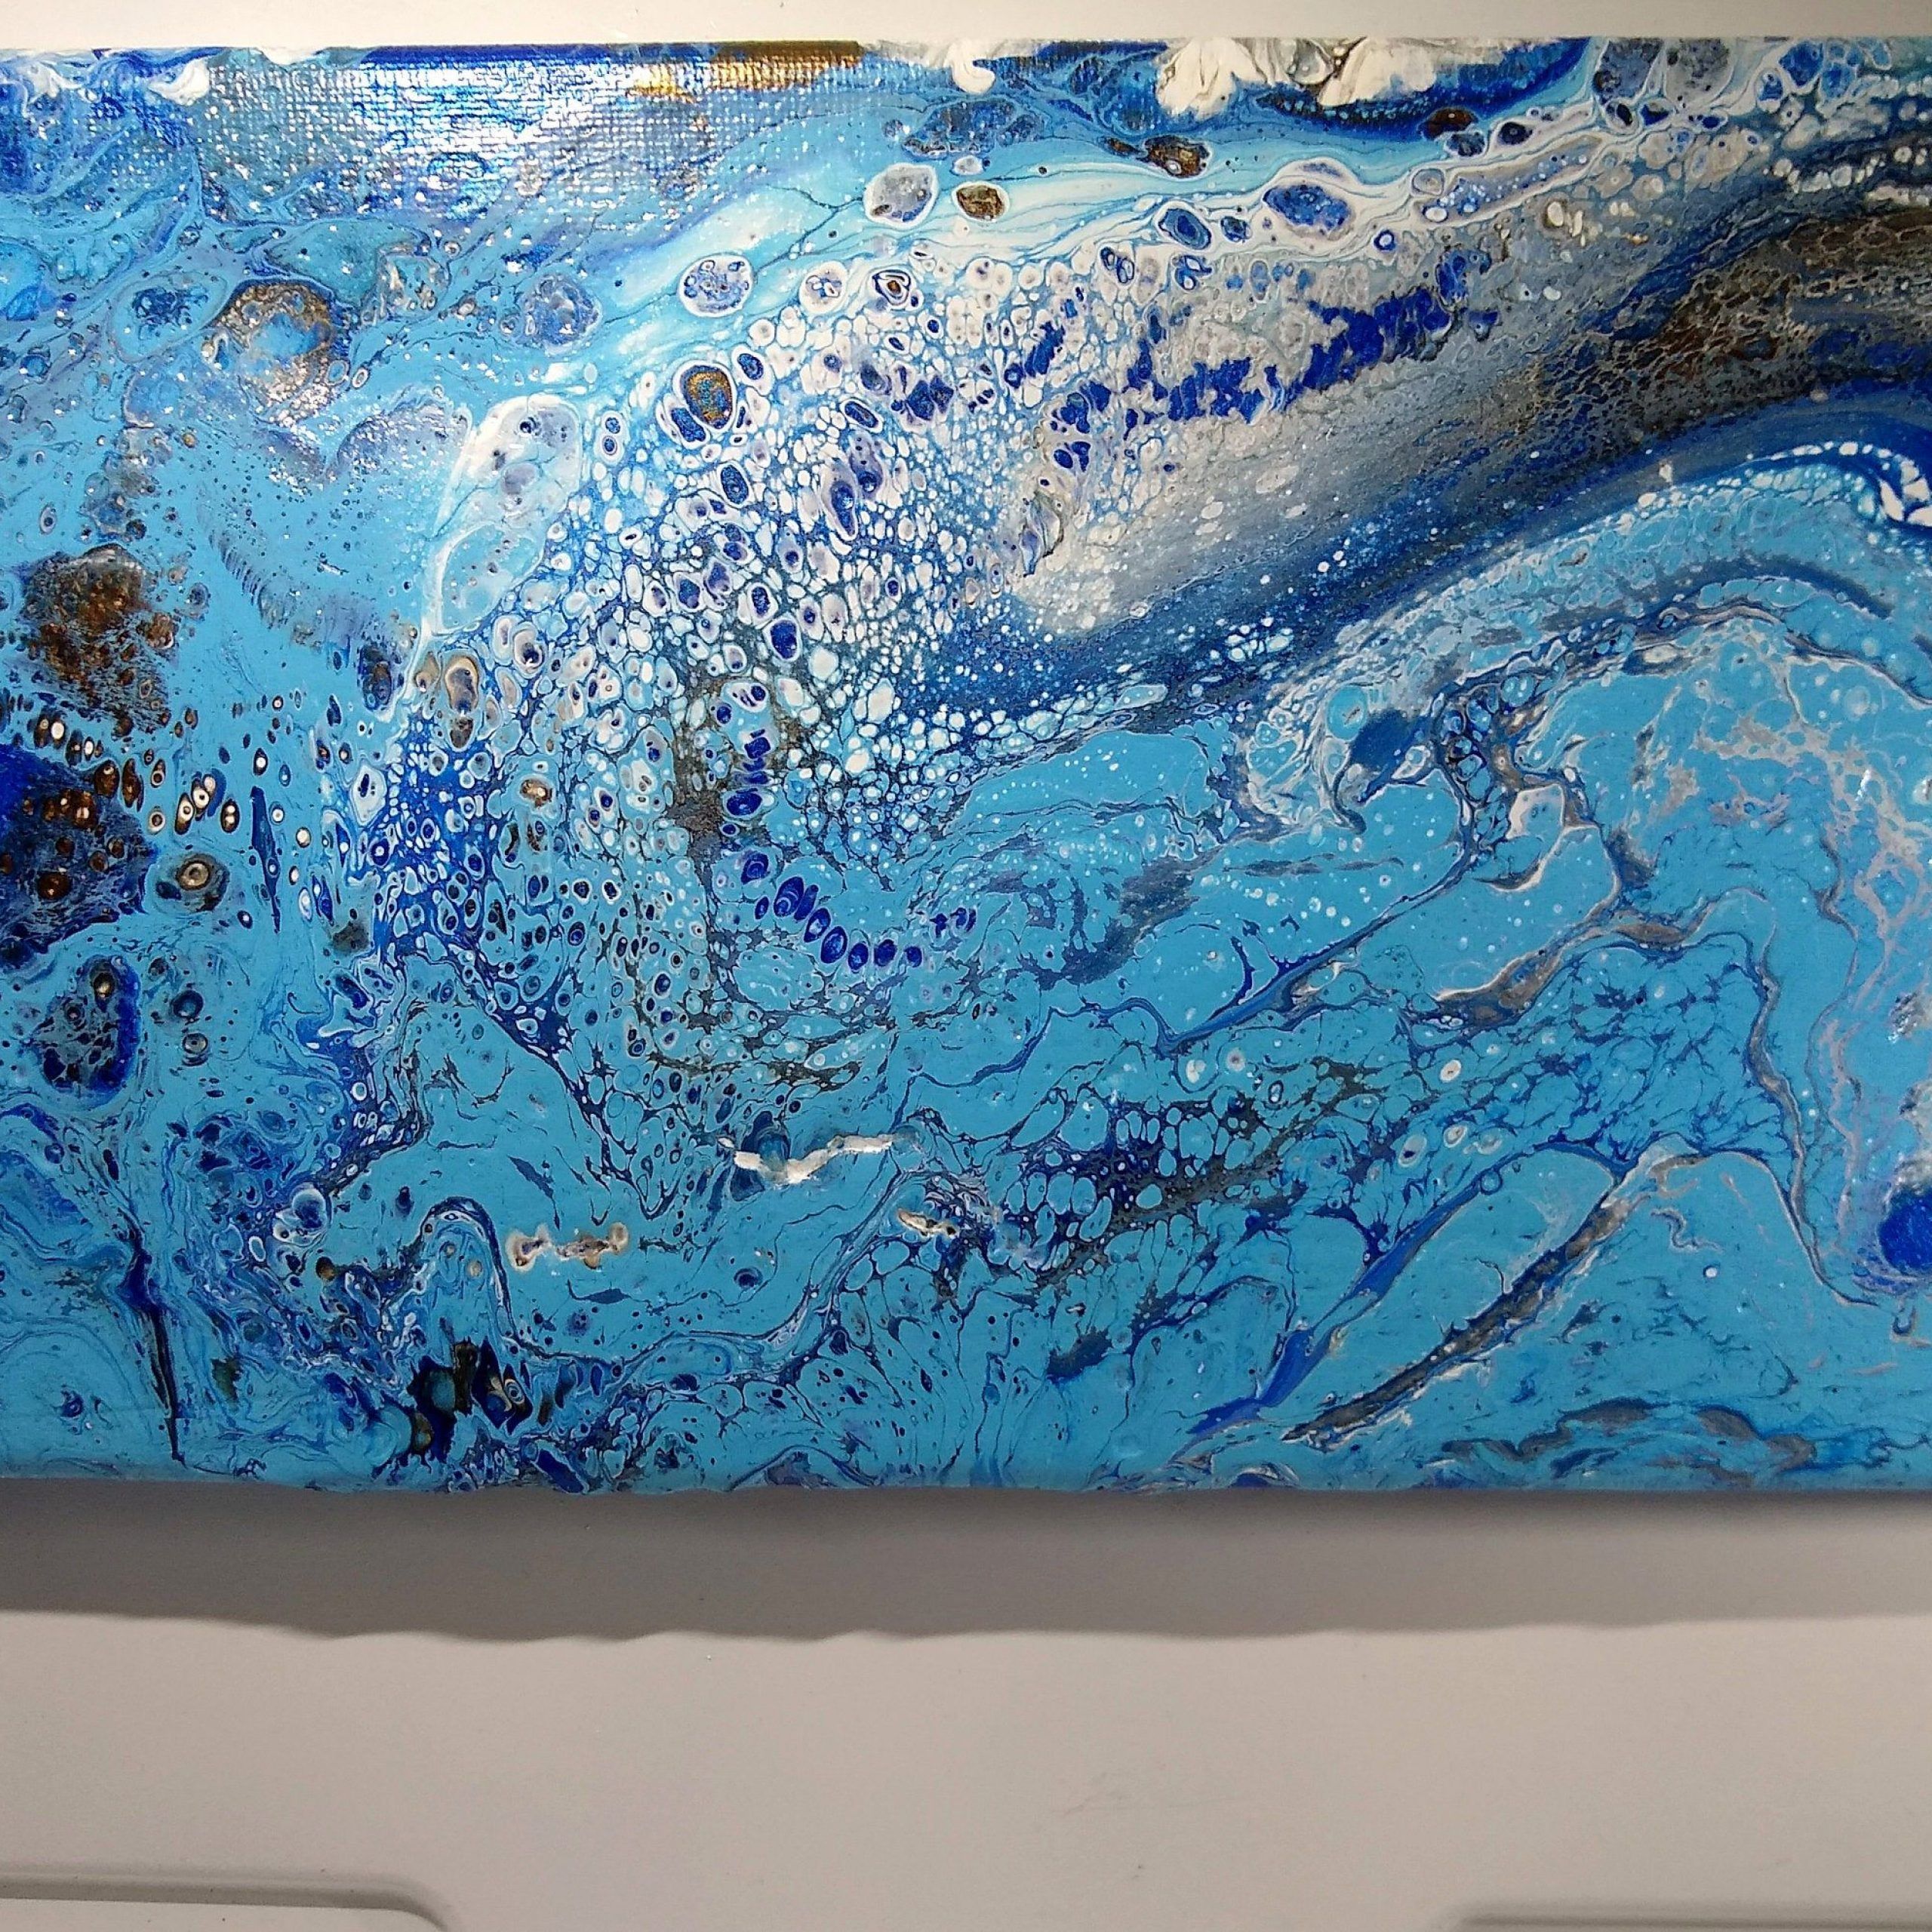 12x7 Wrapped Canvas Fluid Acrylic Painting Wall Art (with Images Within Best And Newest Fluid Wall Art (View 10 of 20)